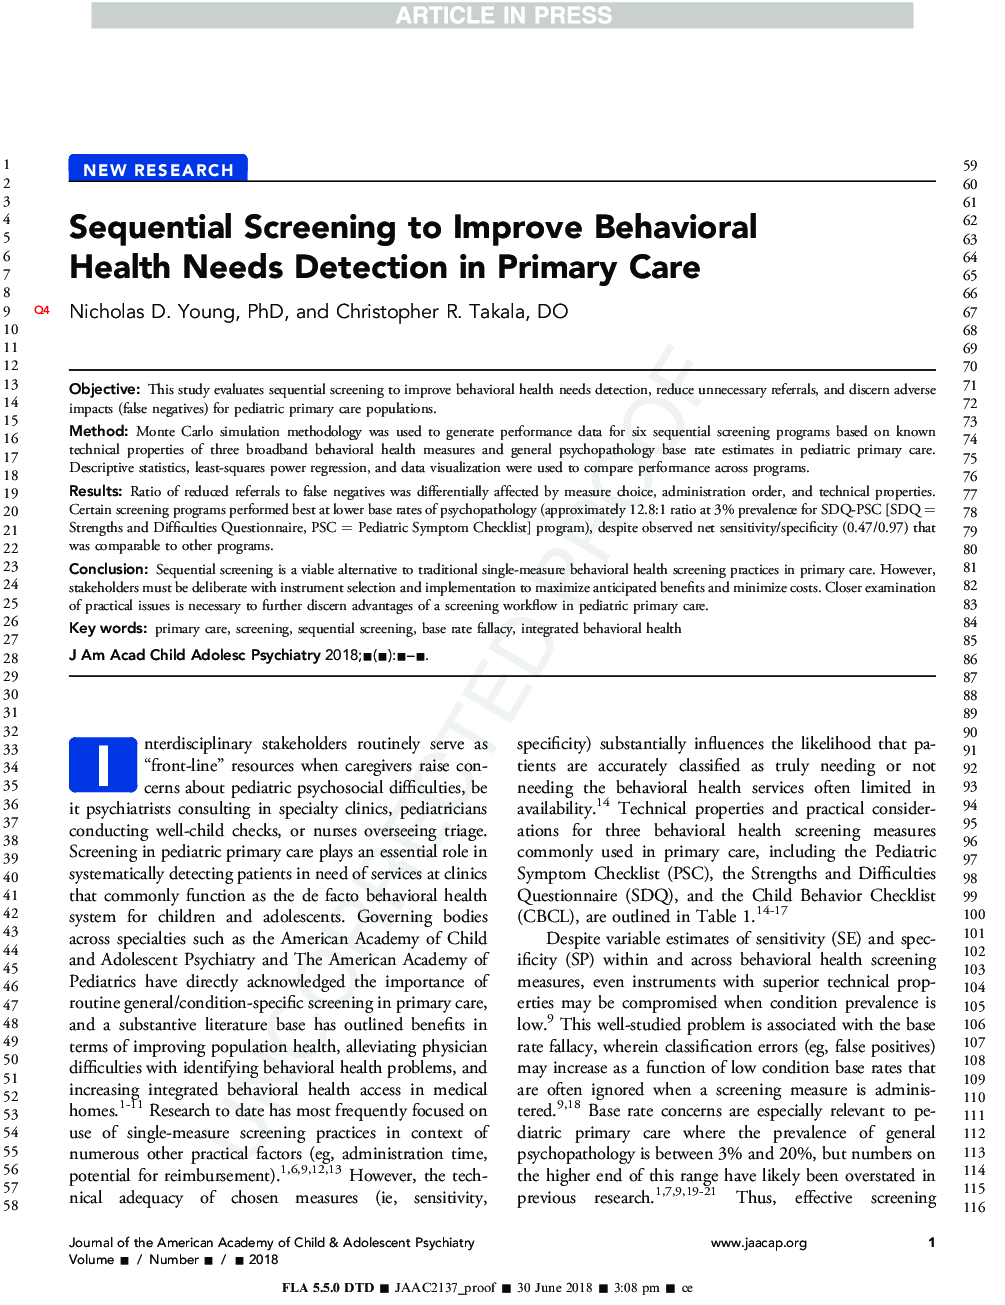 Sequential Screening to Improve Behavioral Health Needs Detection in Primary Care